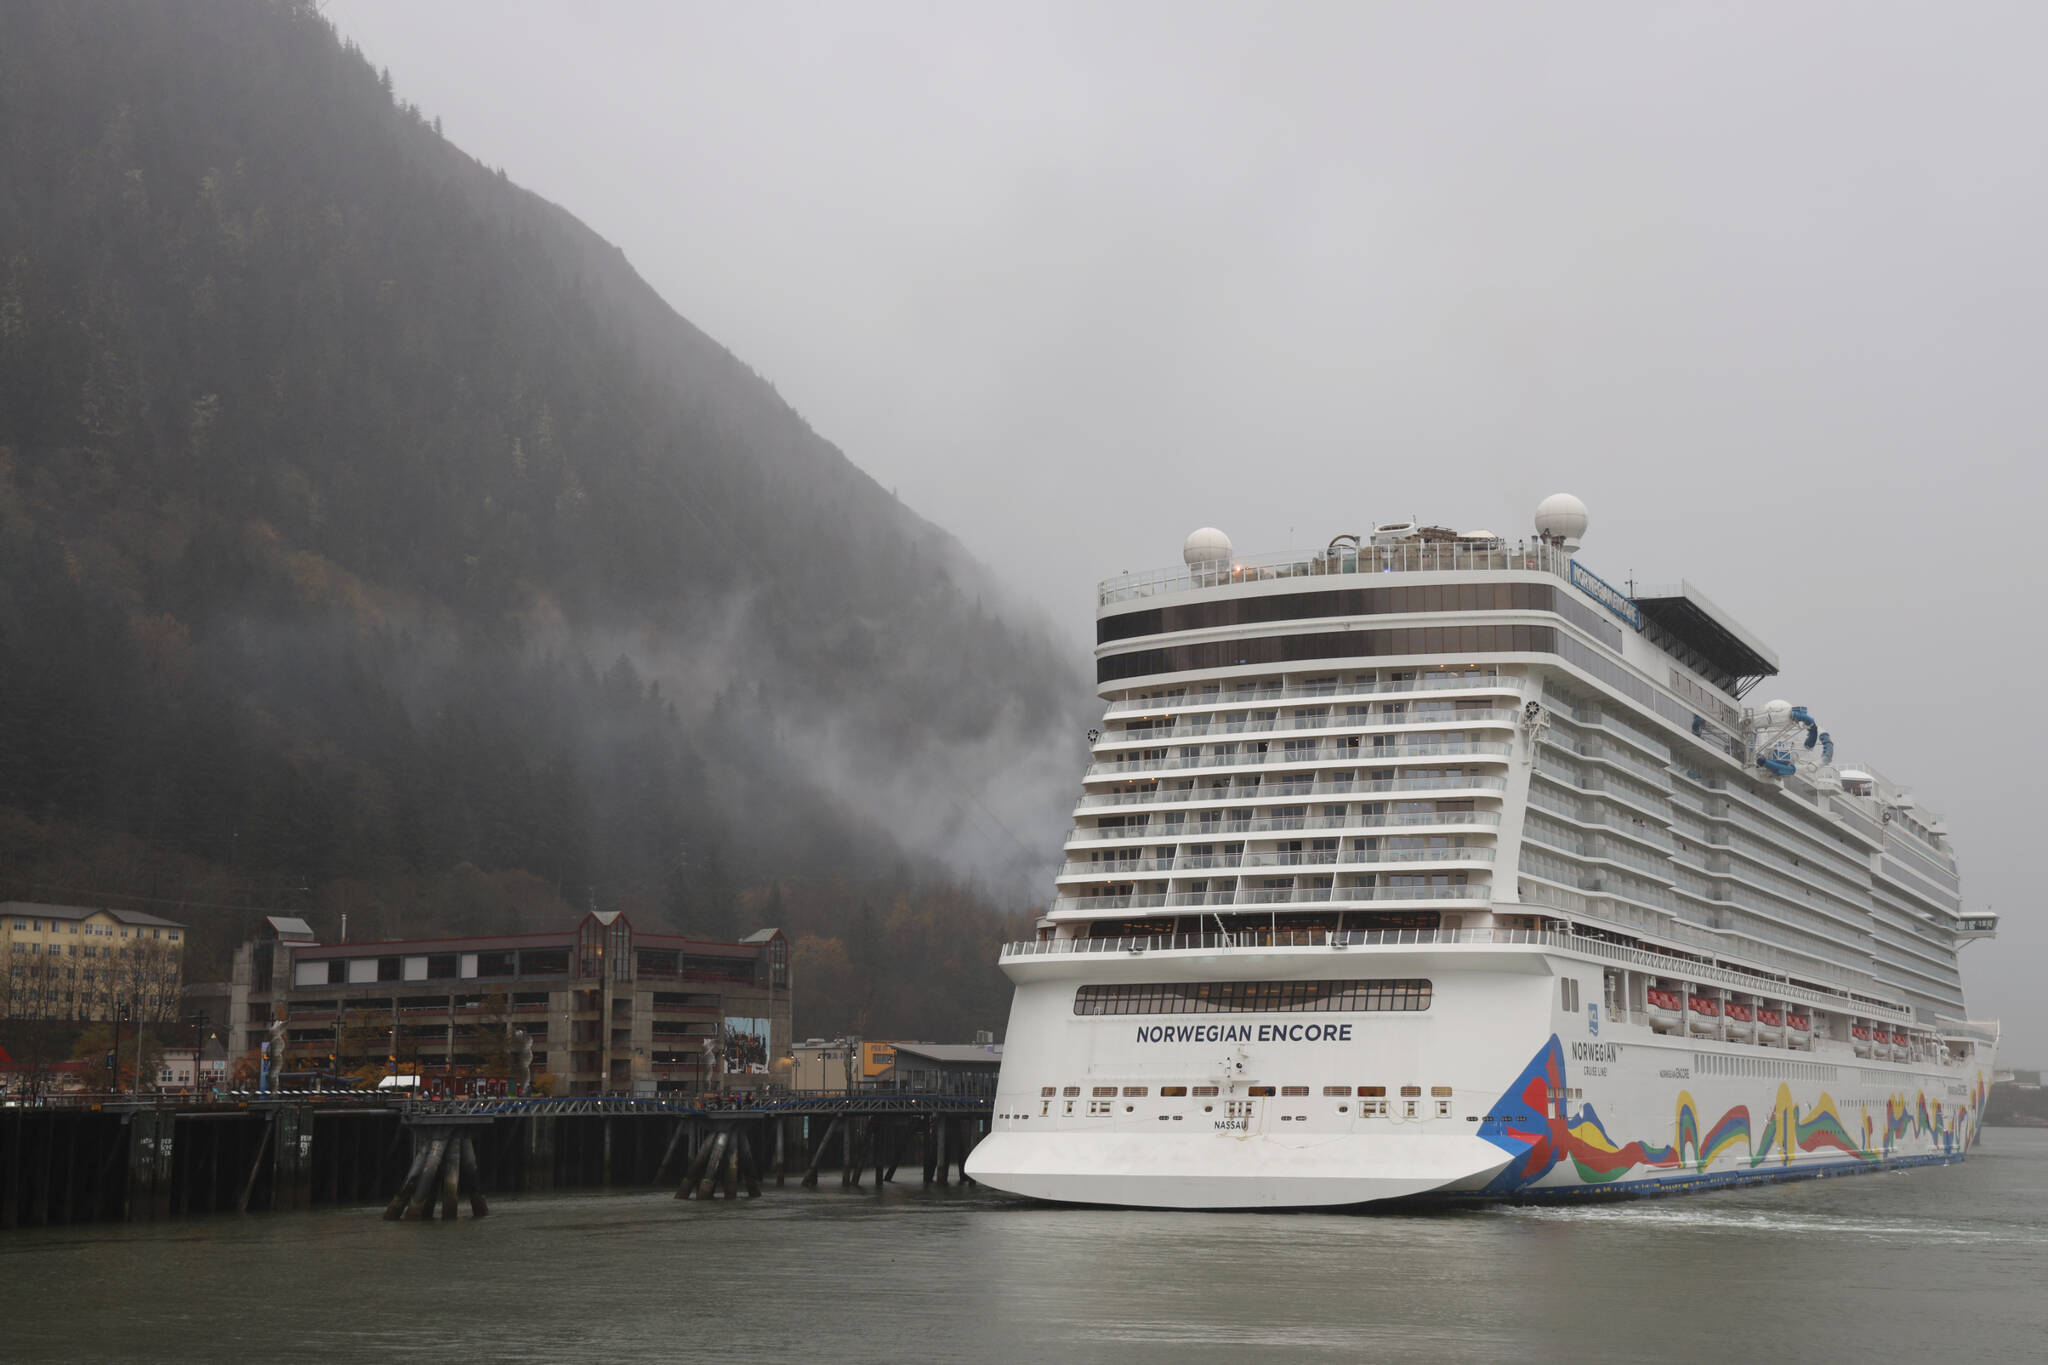 The final cruise ship, Norwegian Cruise Line’s Norwegian Encore, sailed out of Juneau Tuesday night marking the end of another tourism season that, according to officials, brought near pre-pandemic numbers of visitors to the capital city. (Clarise Larson / Juneau Empire)